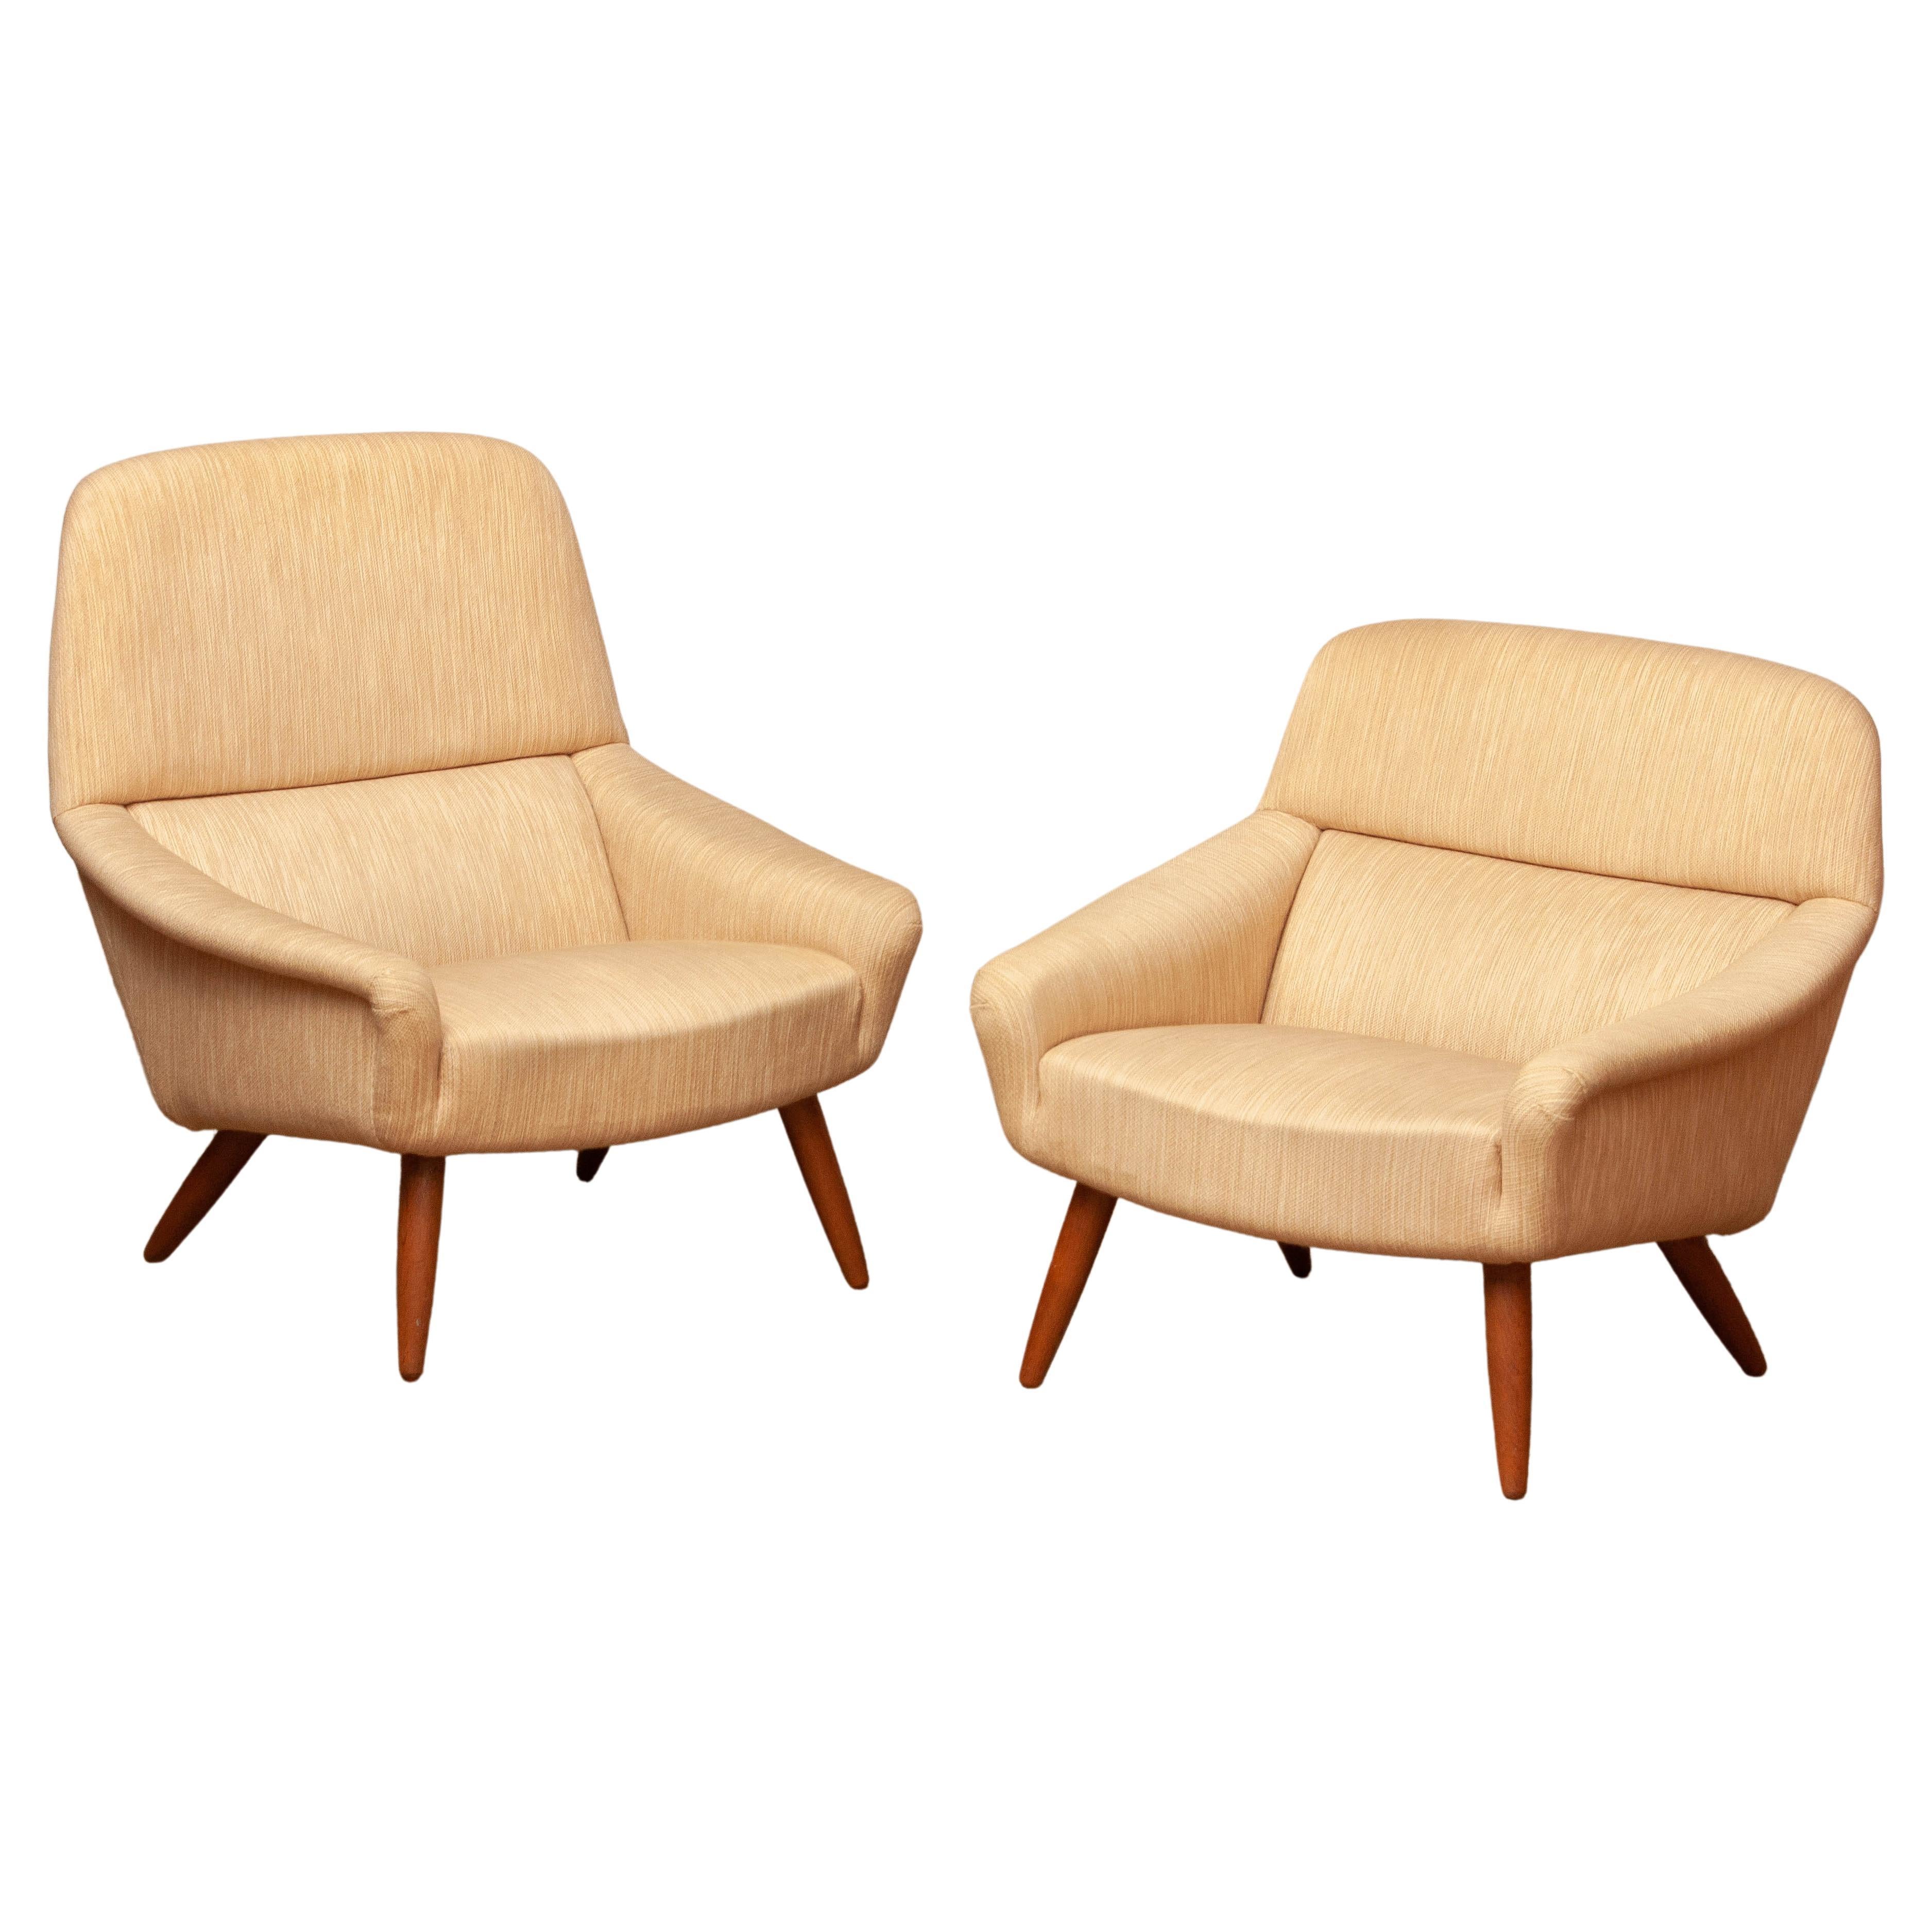 1960s Pair Wool and Oak Lounge Chairs by Leif Hansen for Kronen in Denmark